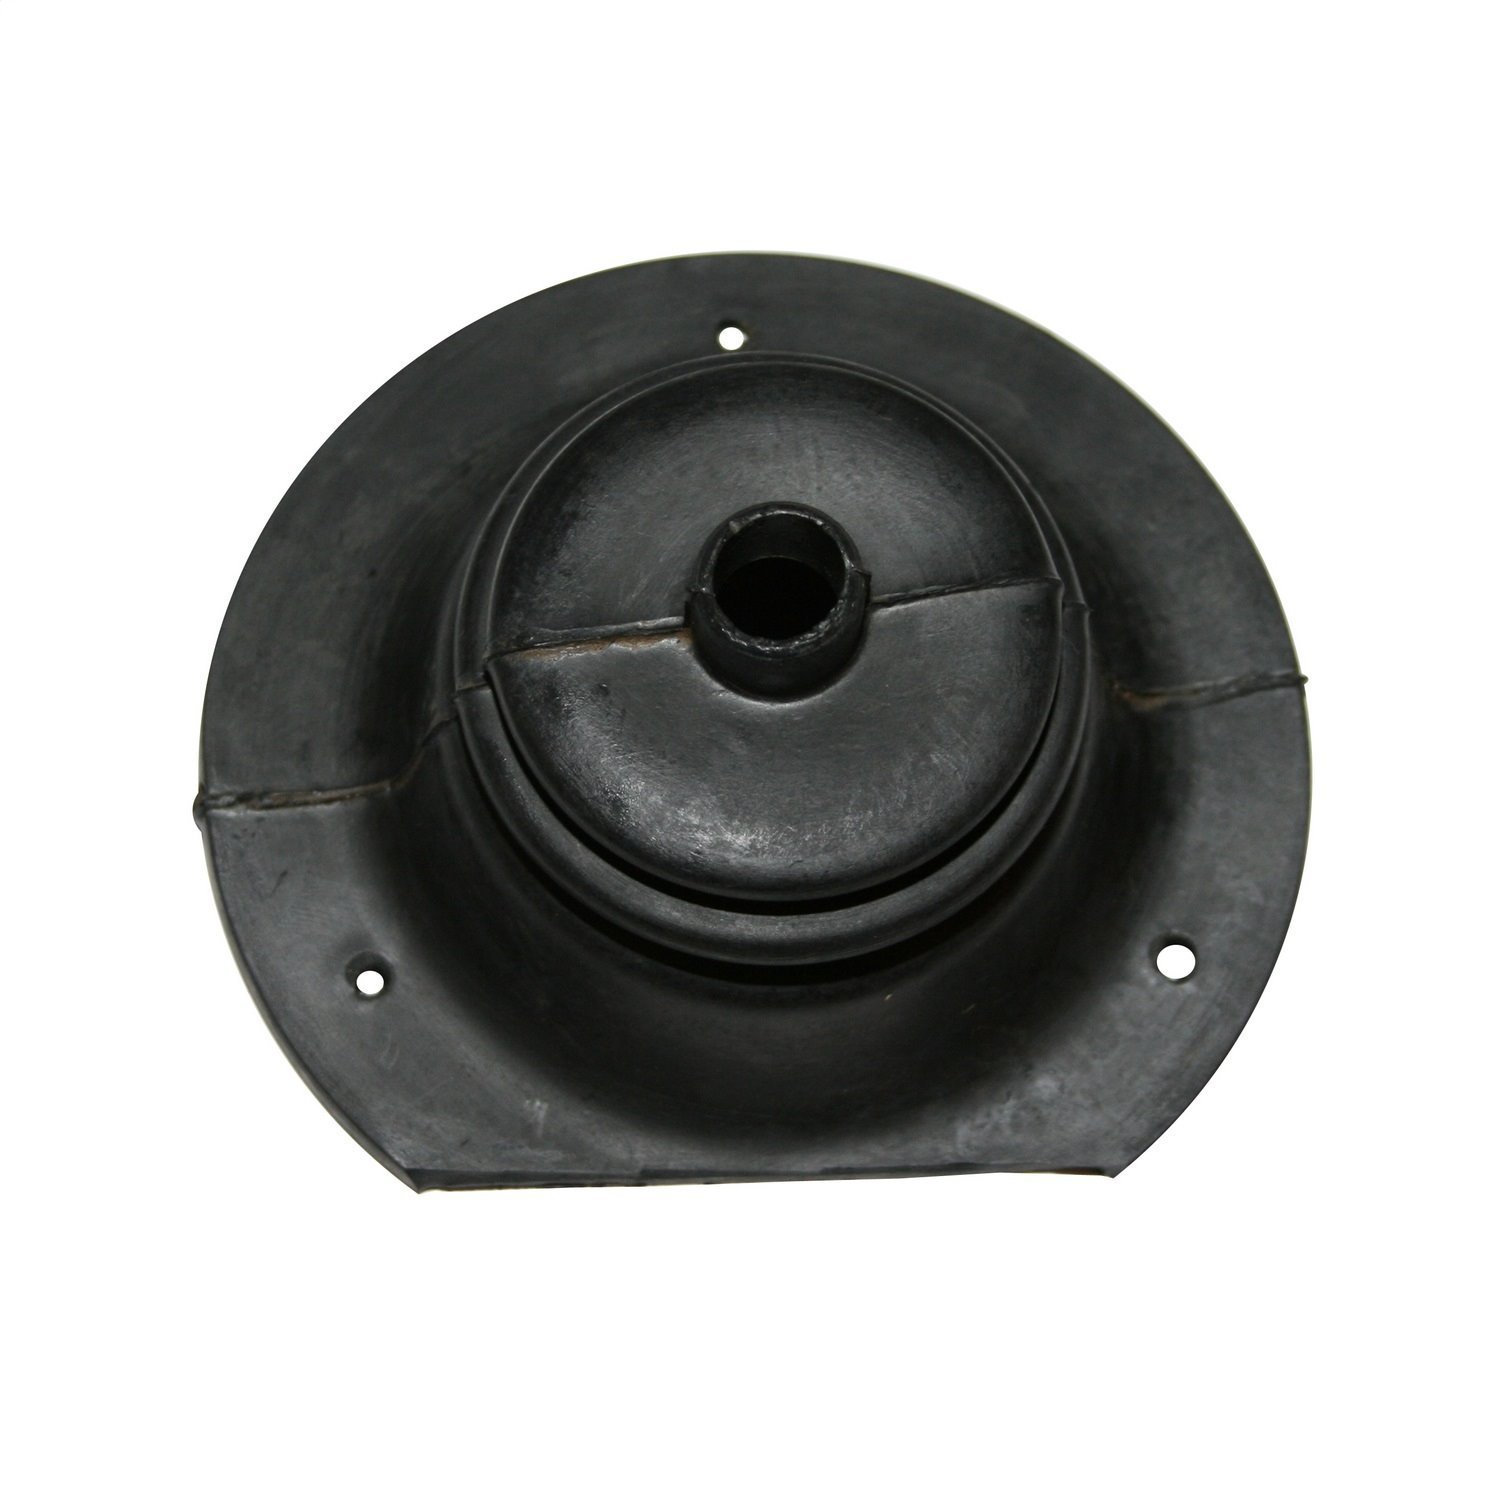 This manual transmission shifter boot fits Borg-Warner T4 and T5 transmissions installed in 80-86 Jeep CJs.